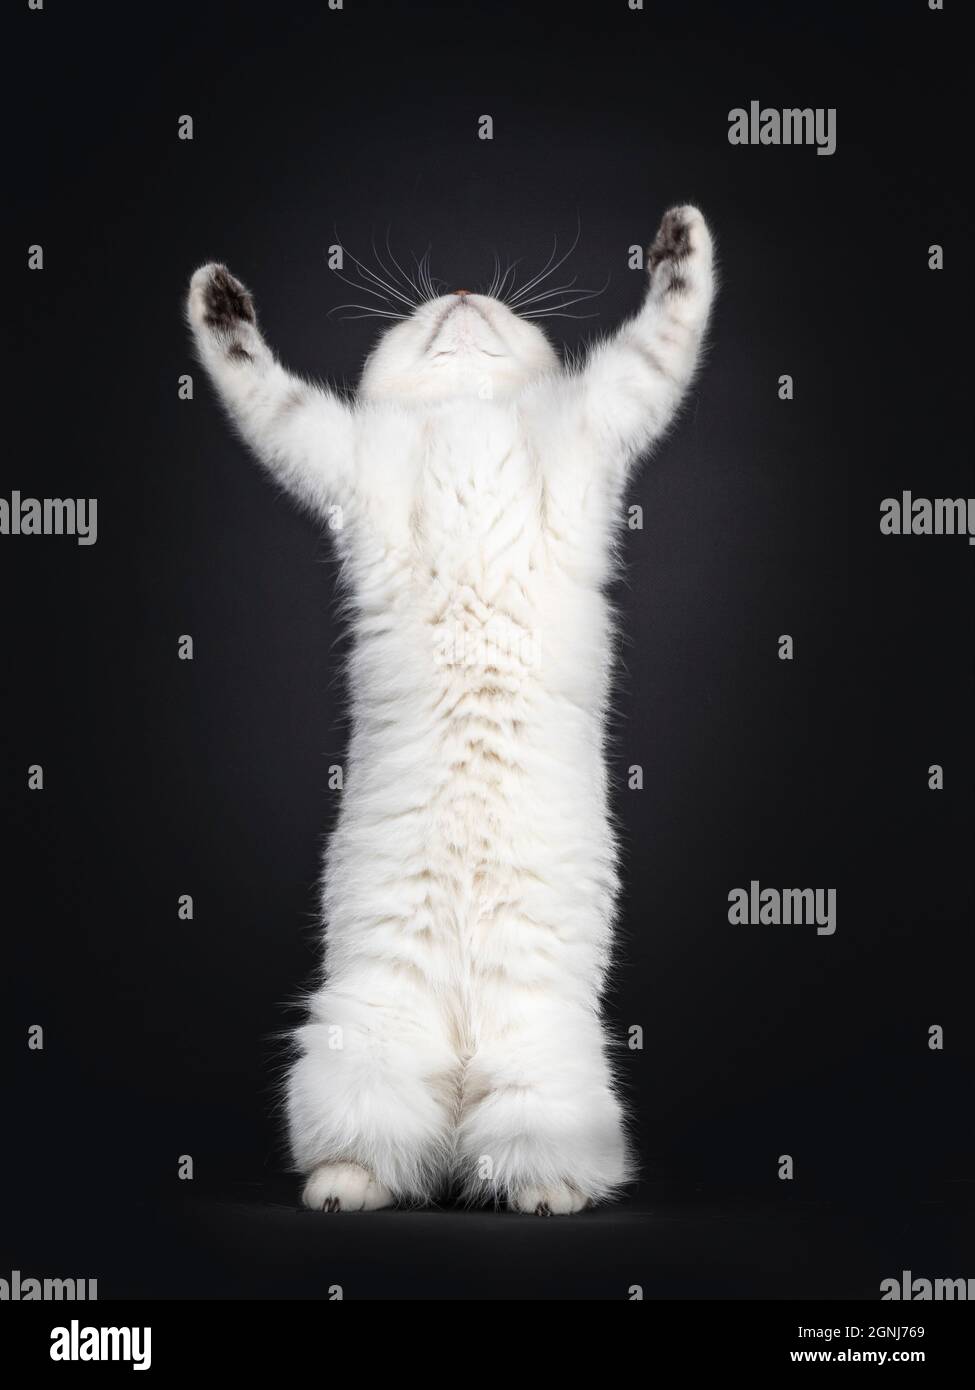 Cute silver shaded British Shorthair cat kitten, on hinf paws reaching for something. Looking up not showing face. Isolated on a black background. Stock Photo